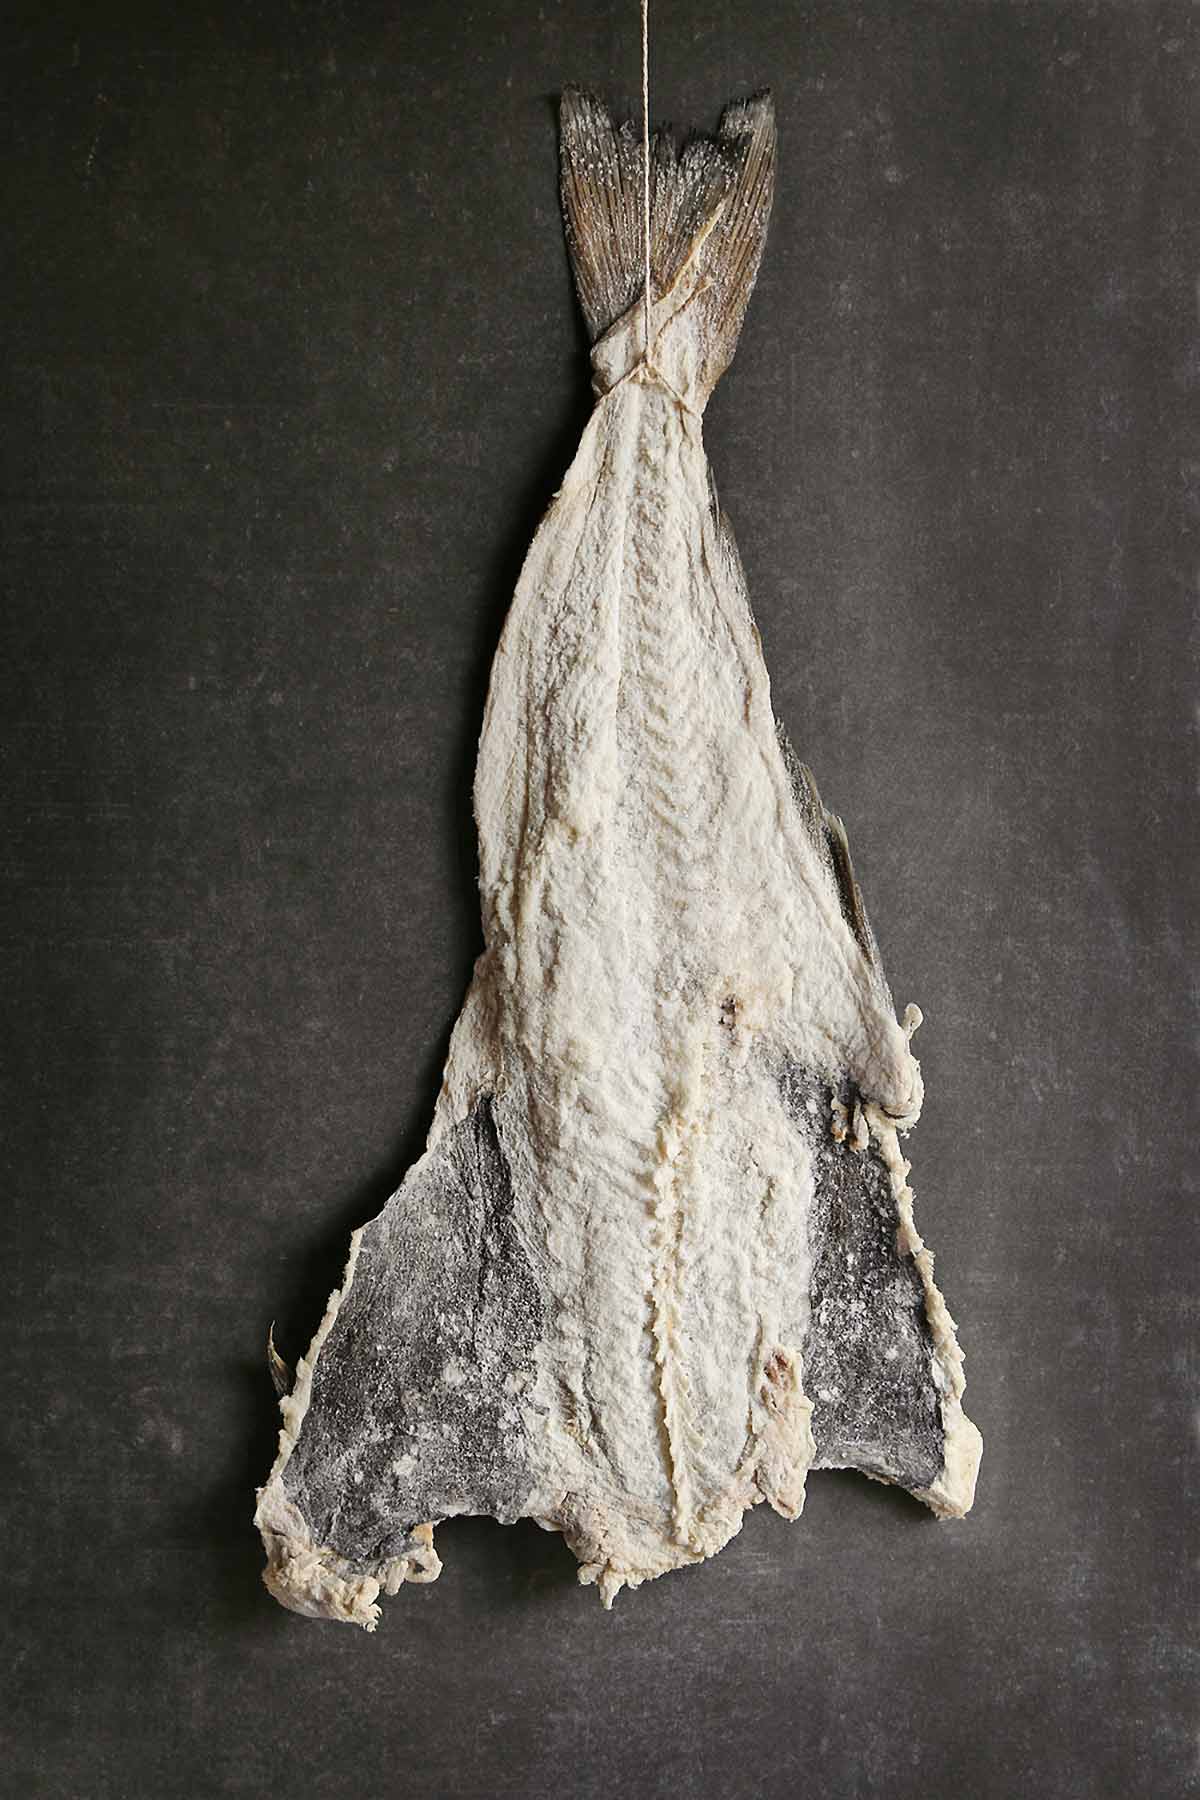 How to Buy, Reconstitute, and Cook Salt Cod | Leite's Culinaria